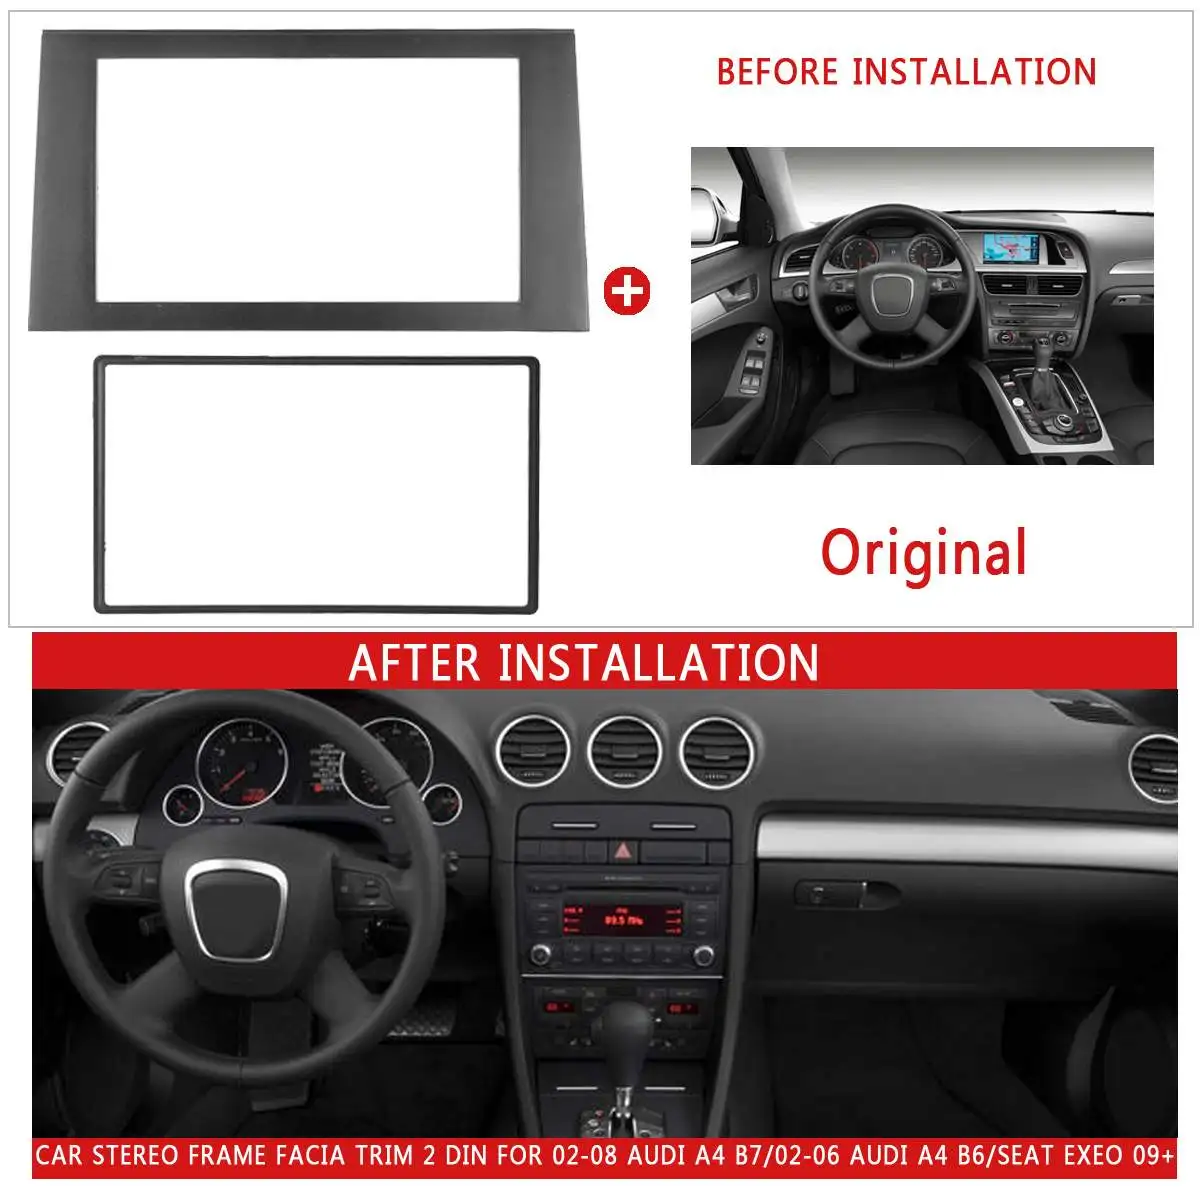 

2Din Car Radio Fascia For Audi A4 B7 2002-08 for Audi A4 B6 02-06 for SEAT Exeo 2009+ Stereo Panel Dash CD Trim Installation Kit